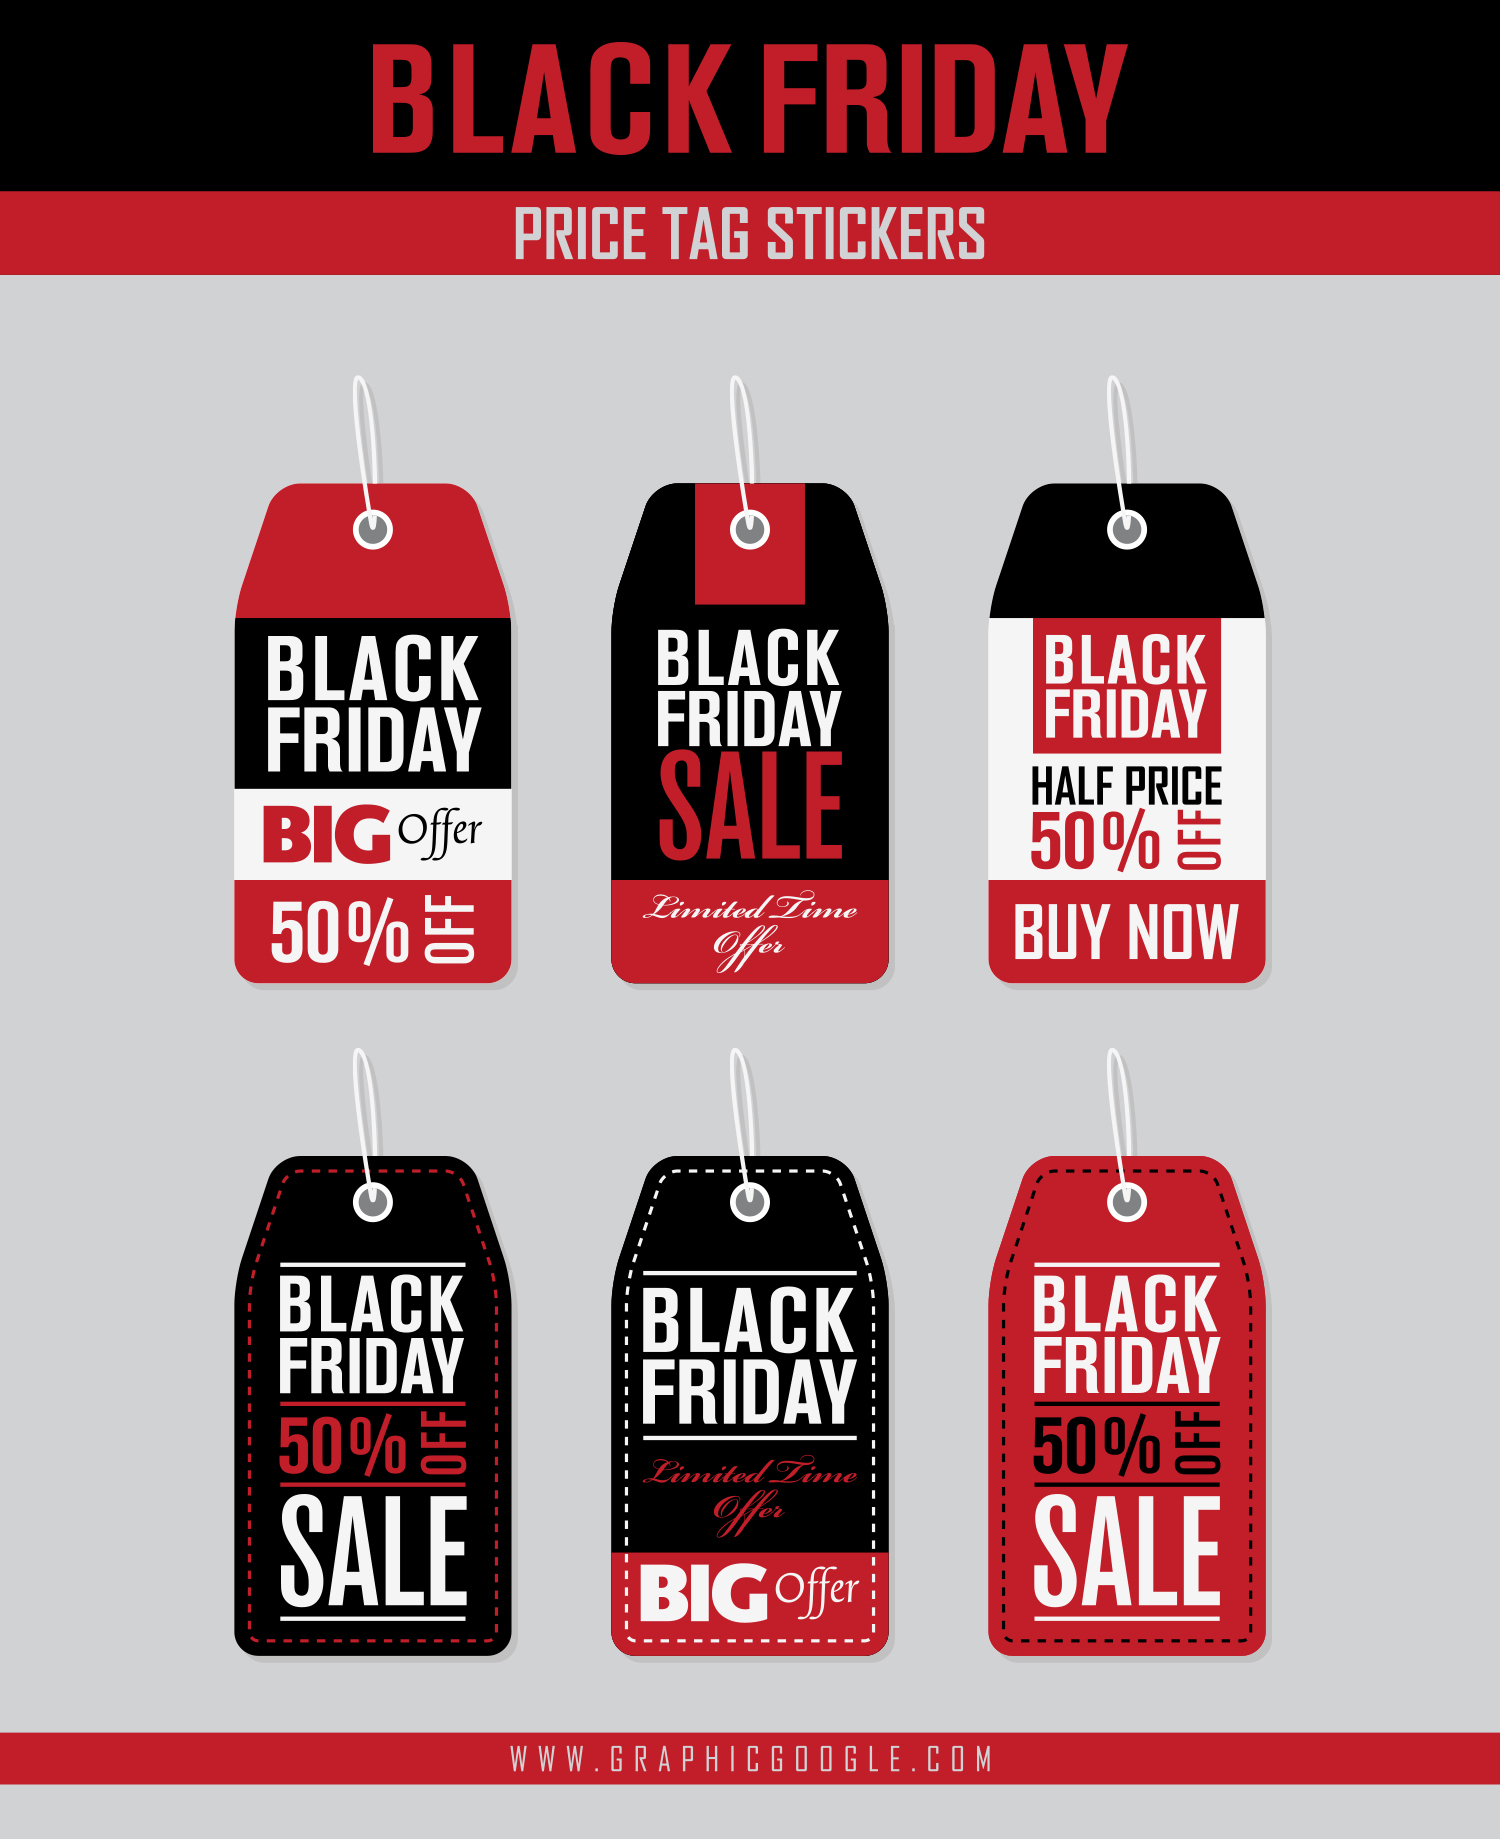 Free Black Friday Price Tag Stickers Vectors For Graphic Designers